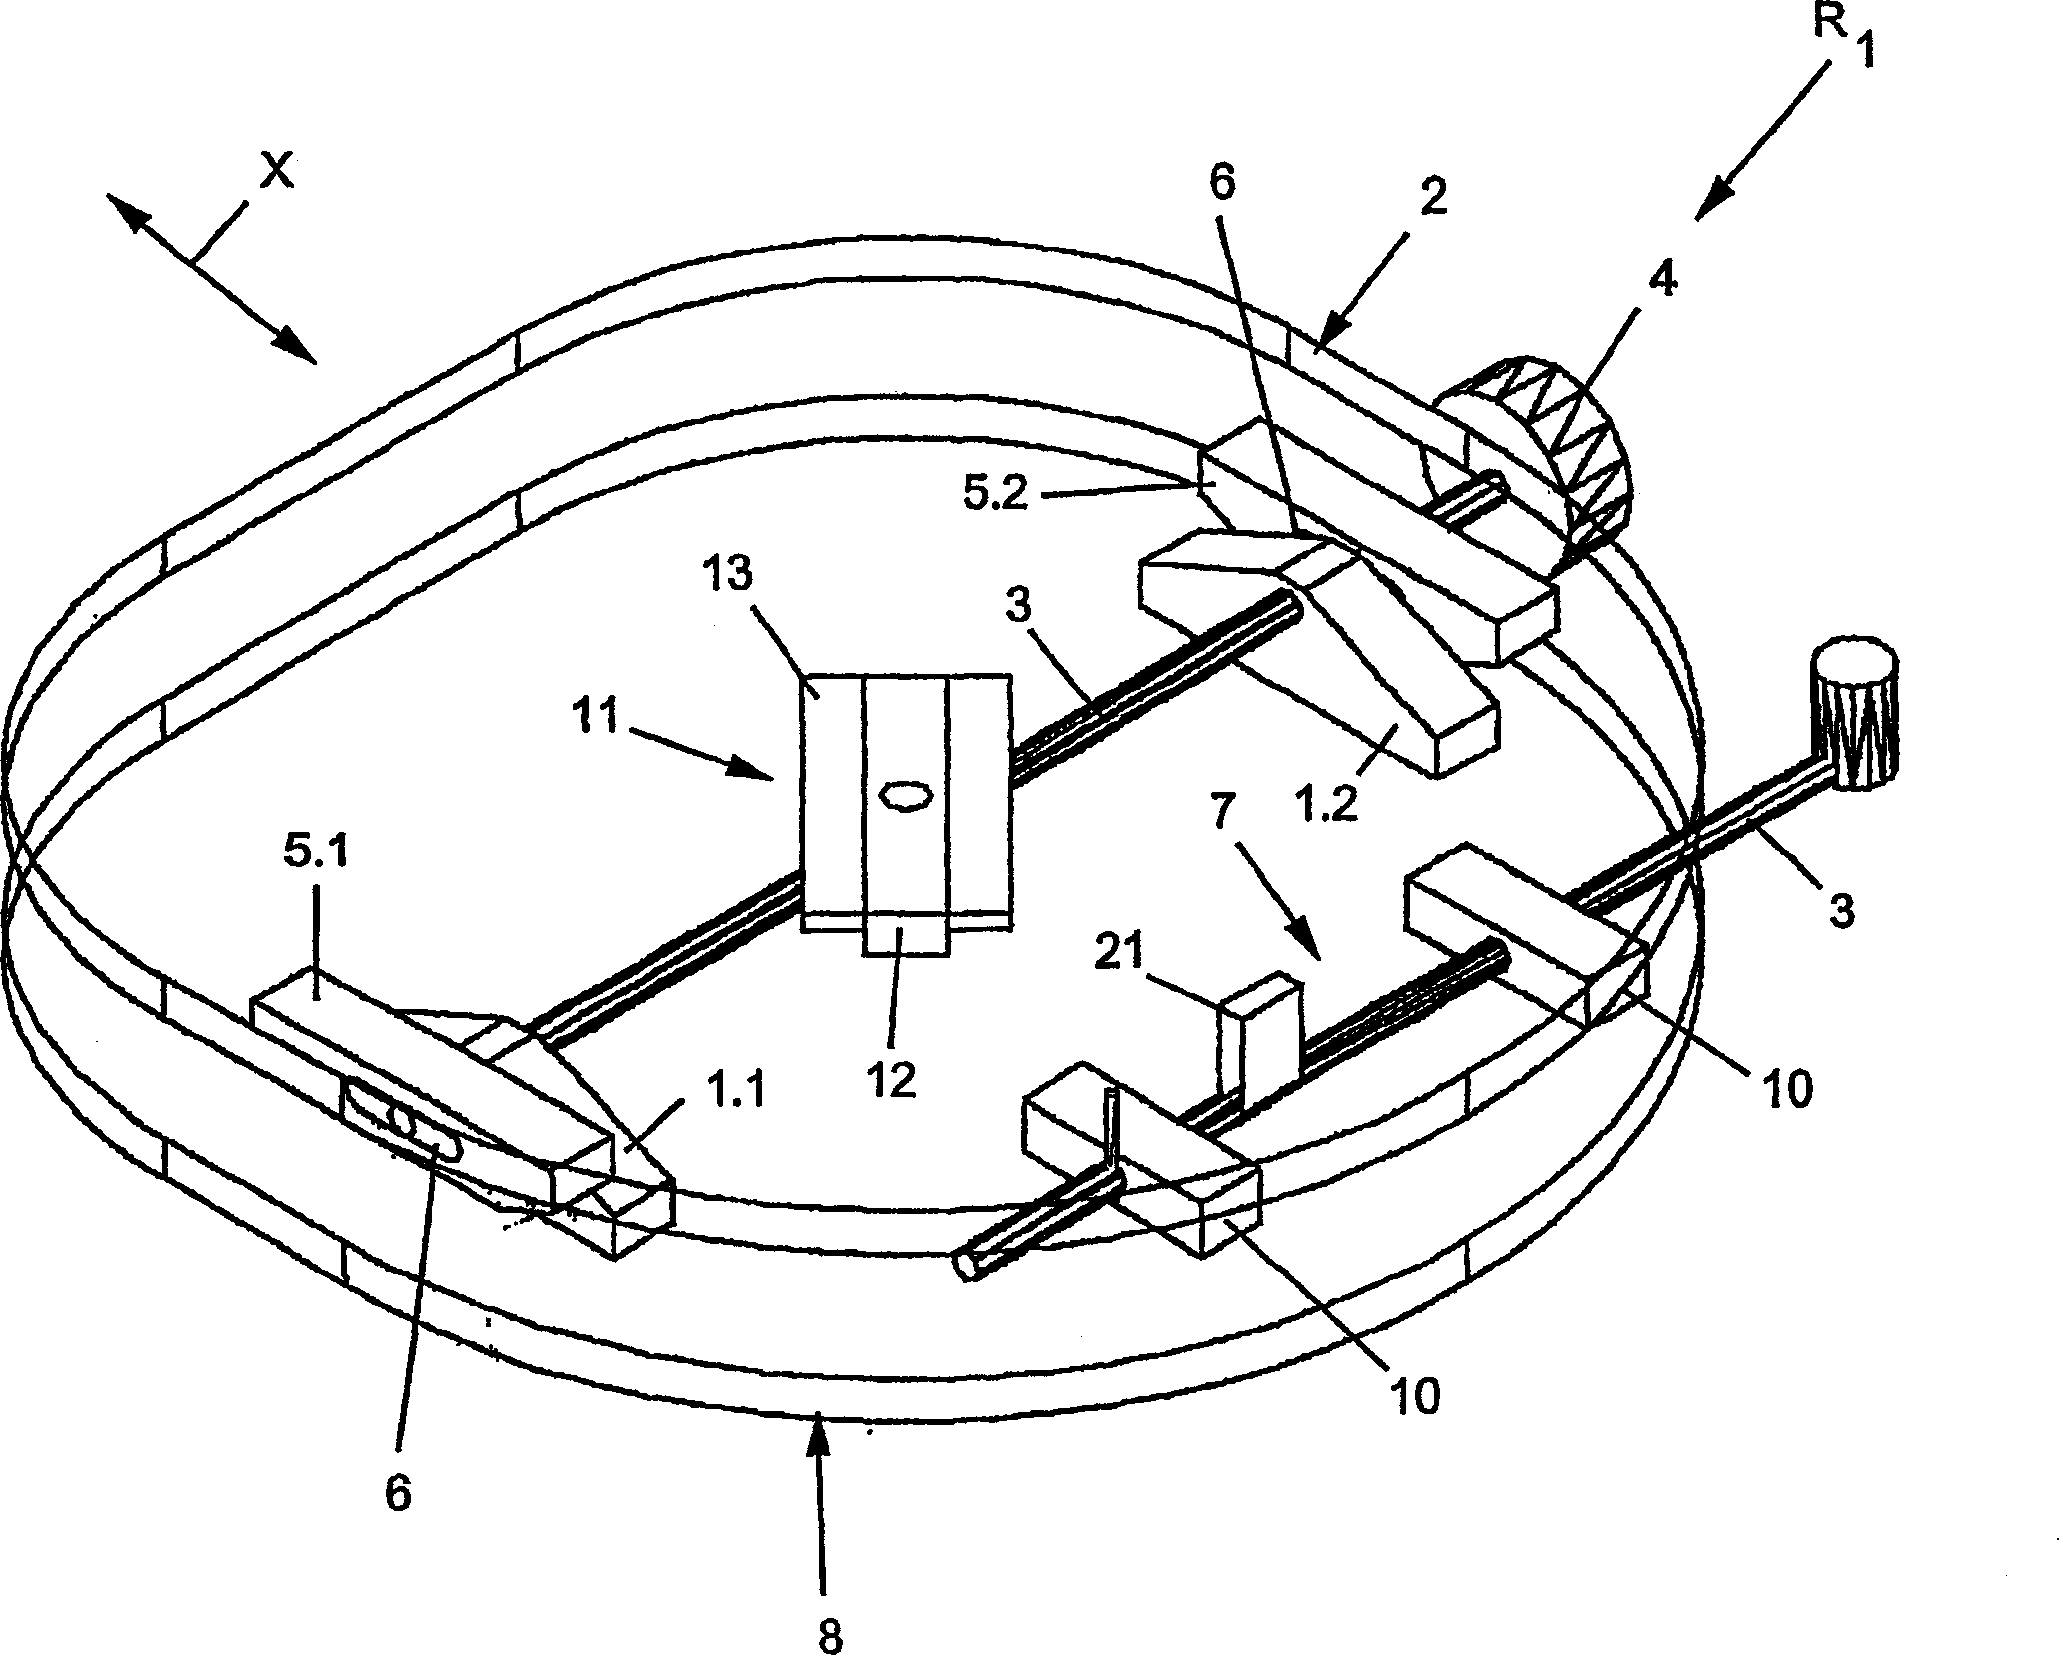 Seating device in the form of seat furniture or for placing on seat furniture